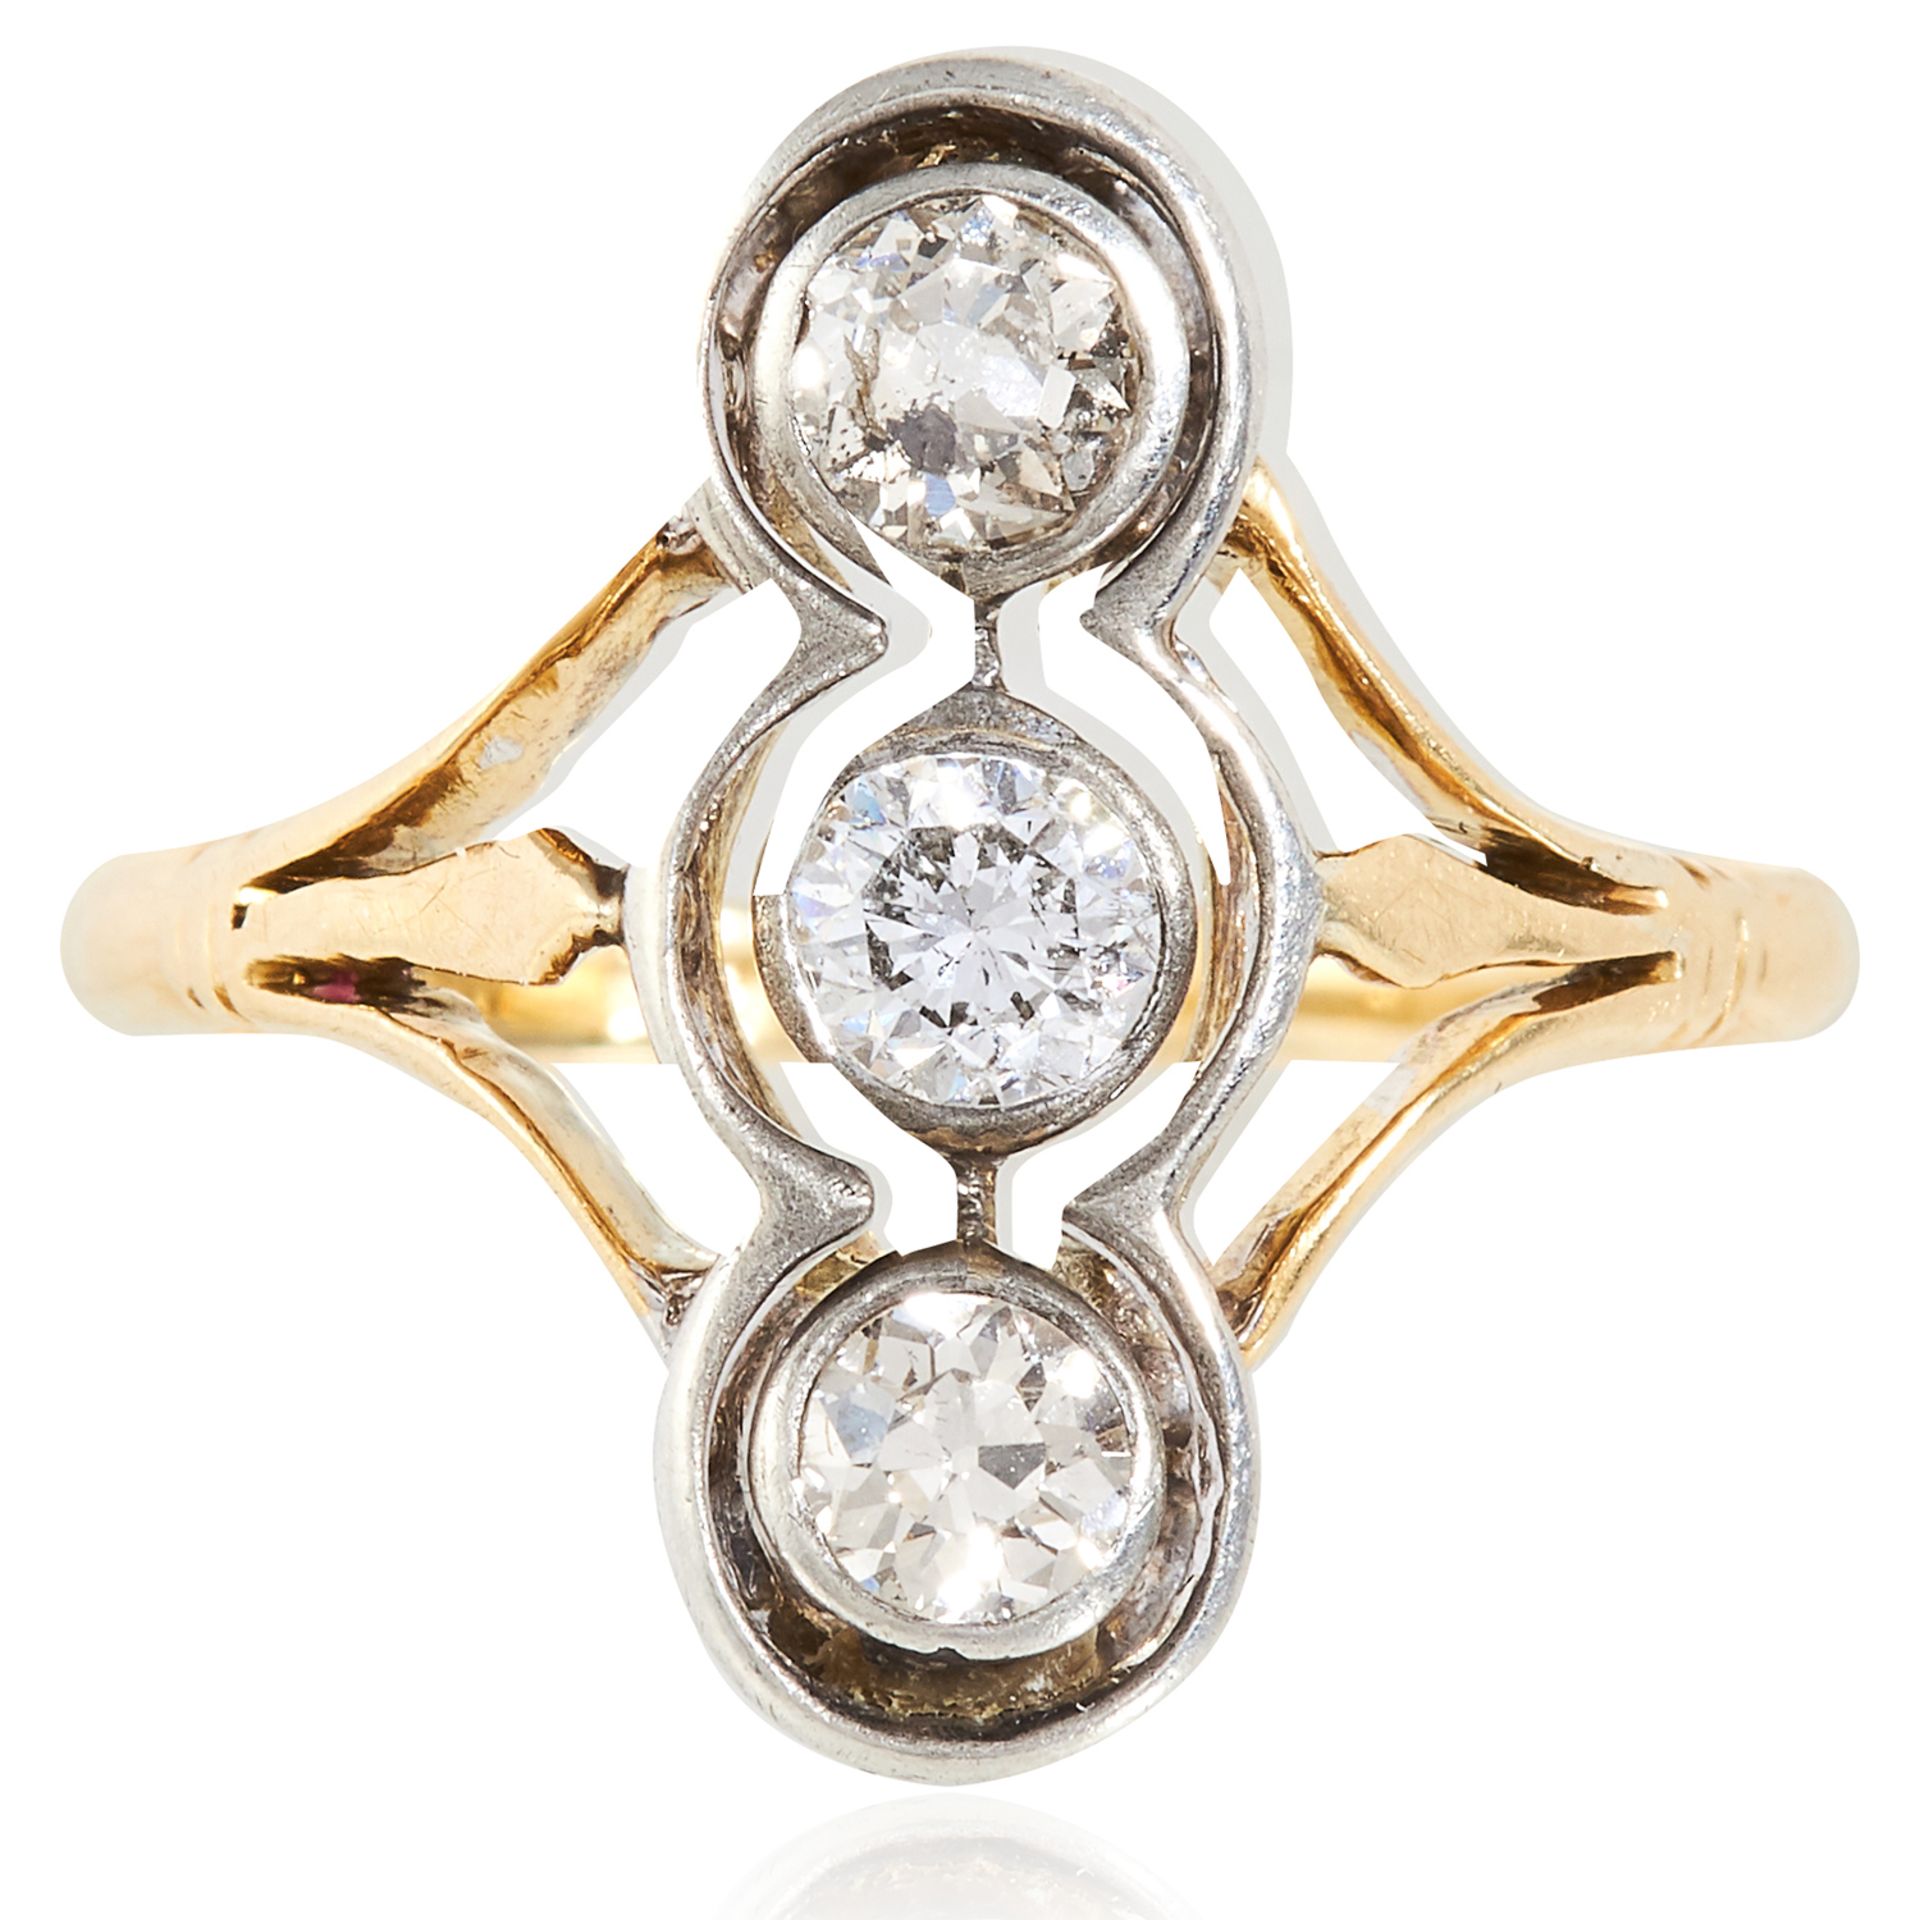 AN ART DECO DIAMOND THREE STONE RING in 18ct yellow gold and platinum, set with a trio of round